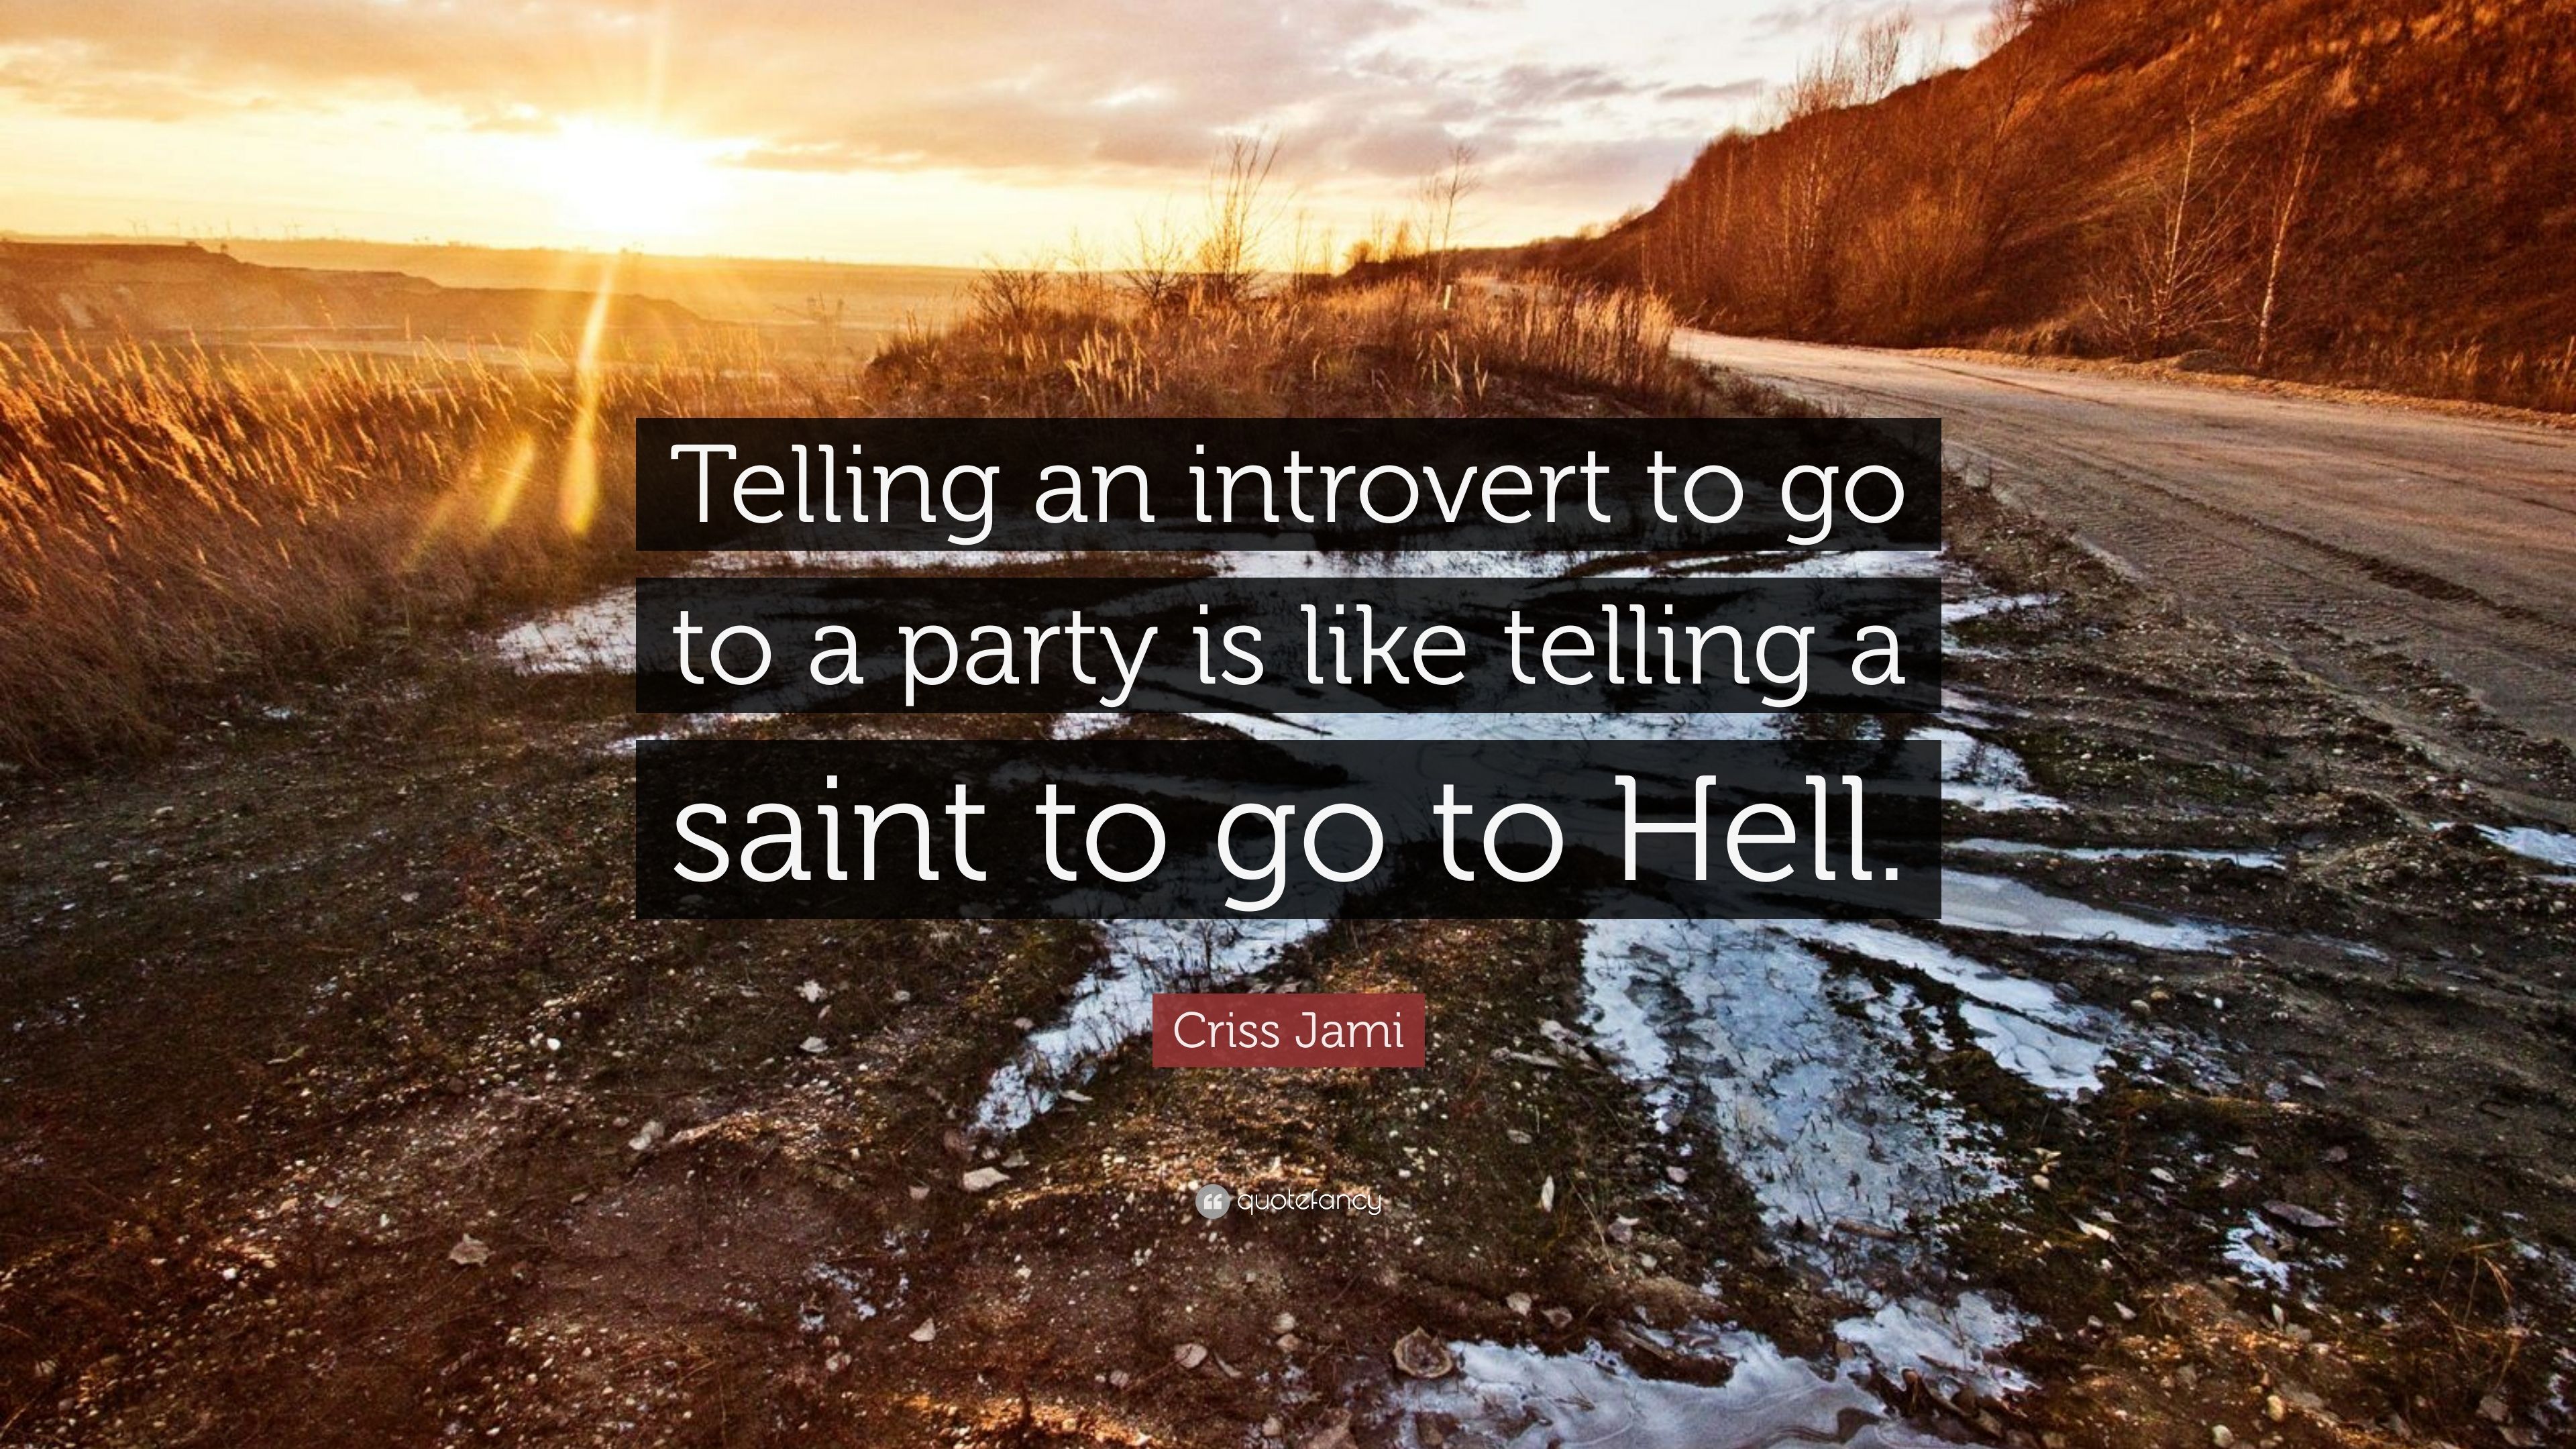 Criss Jami Quote: “Telling an introvert to go to a party is like